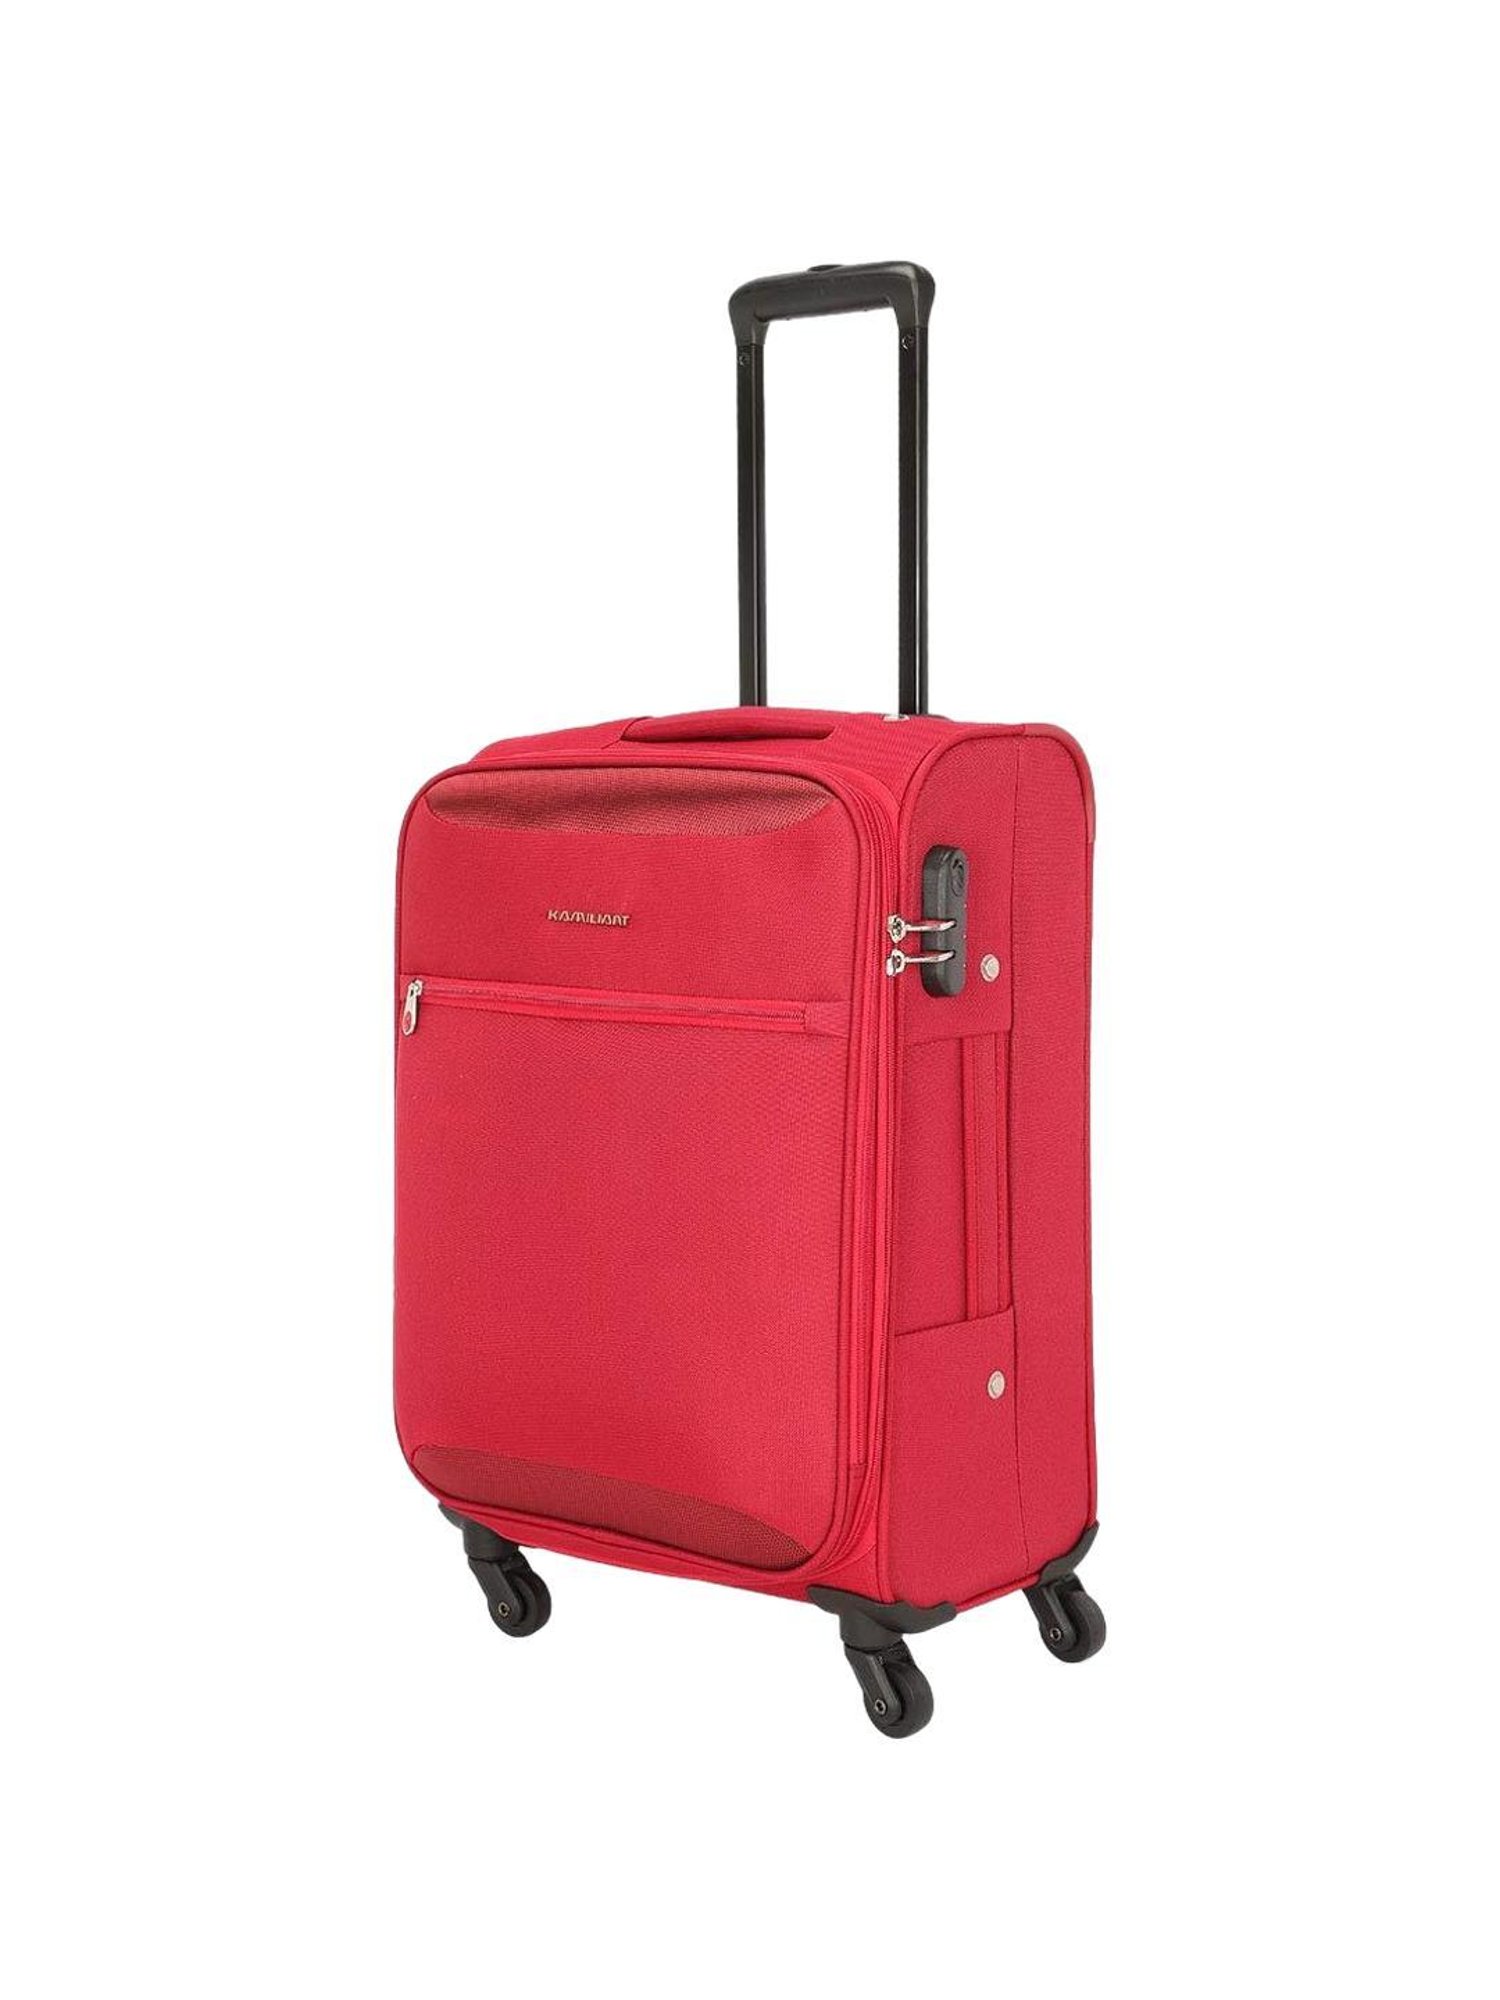 Available In 5 Colour Polycarbonate Kamiliant By American Tourister Zakk  Secure 3 Piece Set Trolley Bag, For Travelling, 1 at best price in Anand